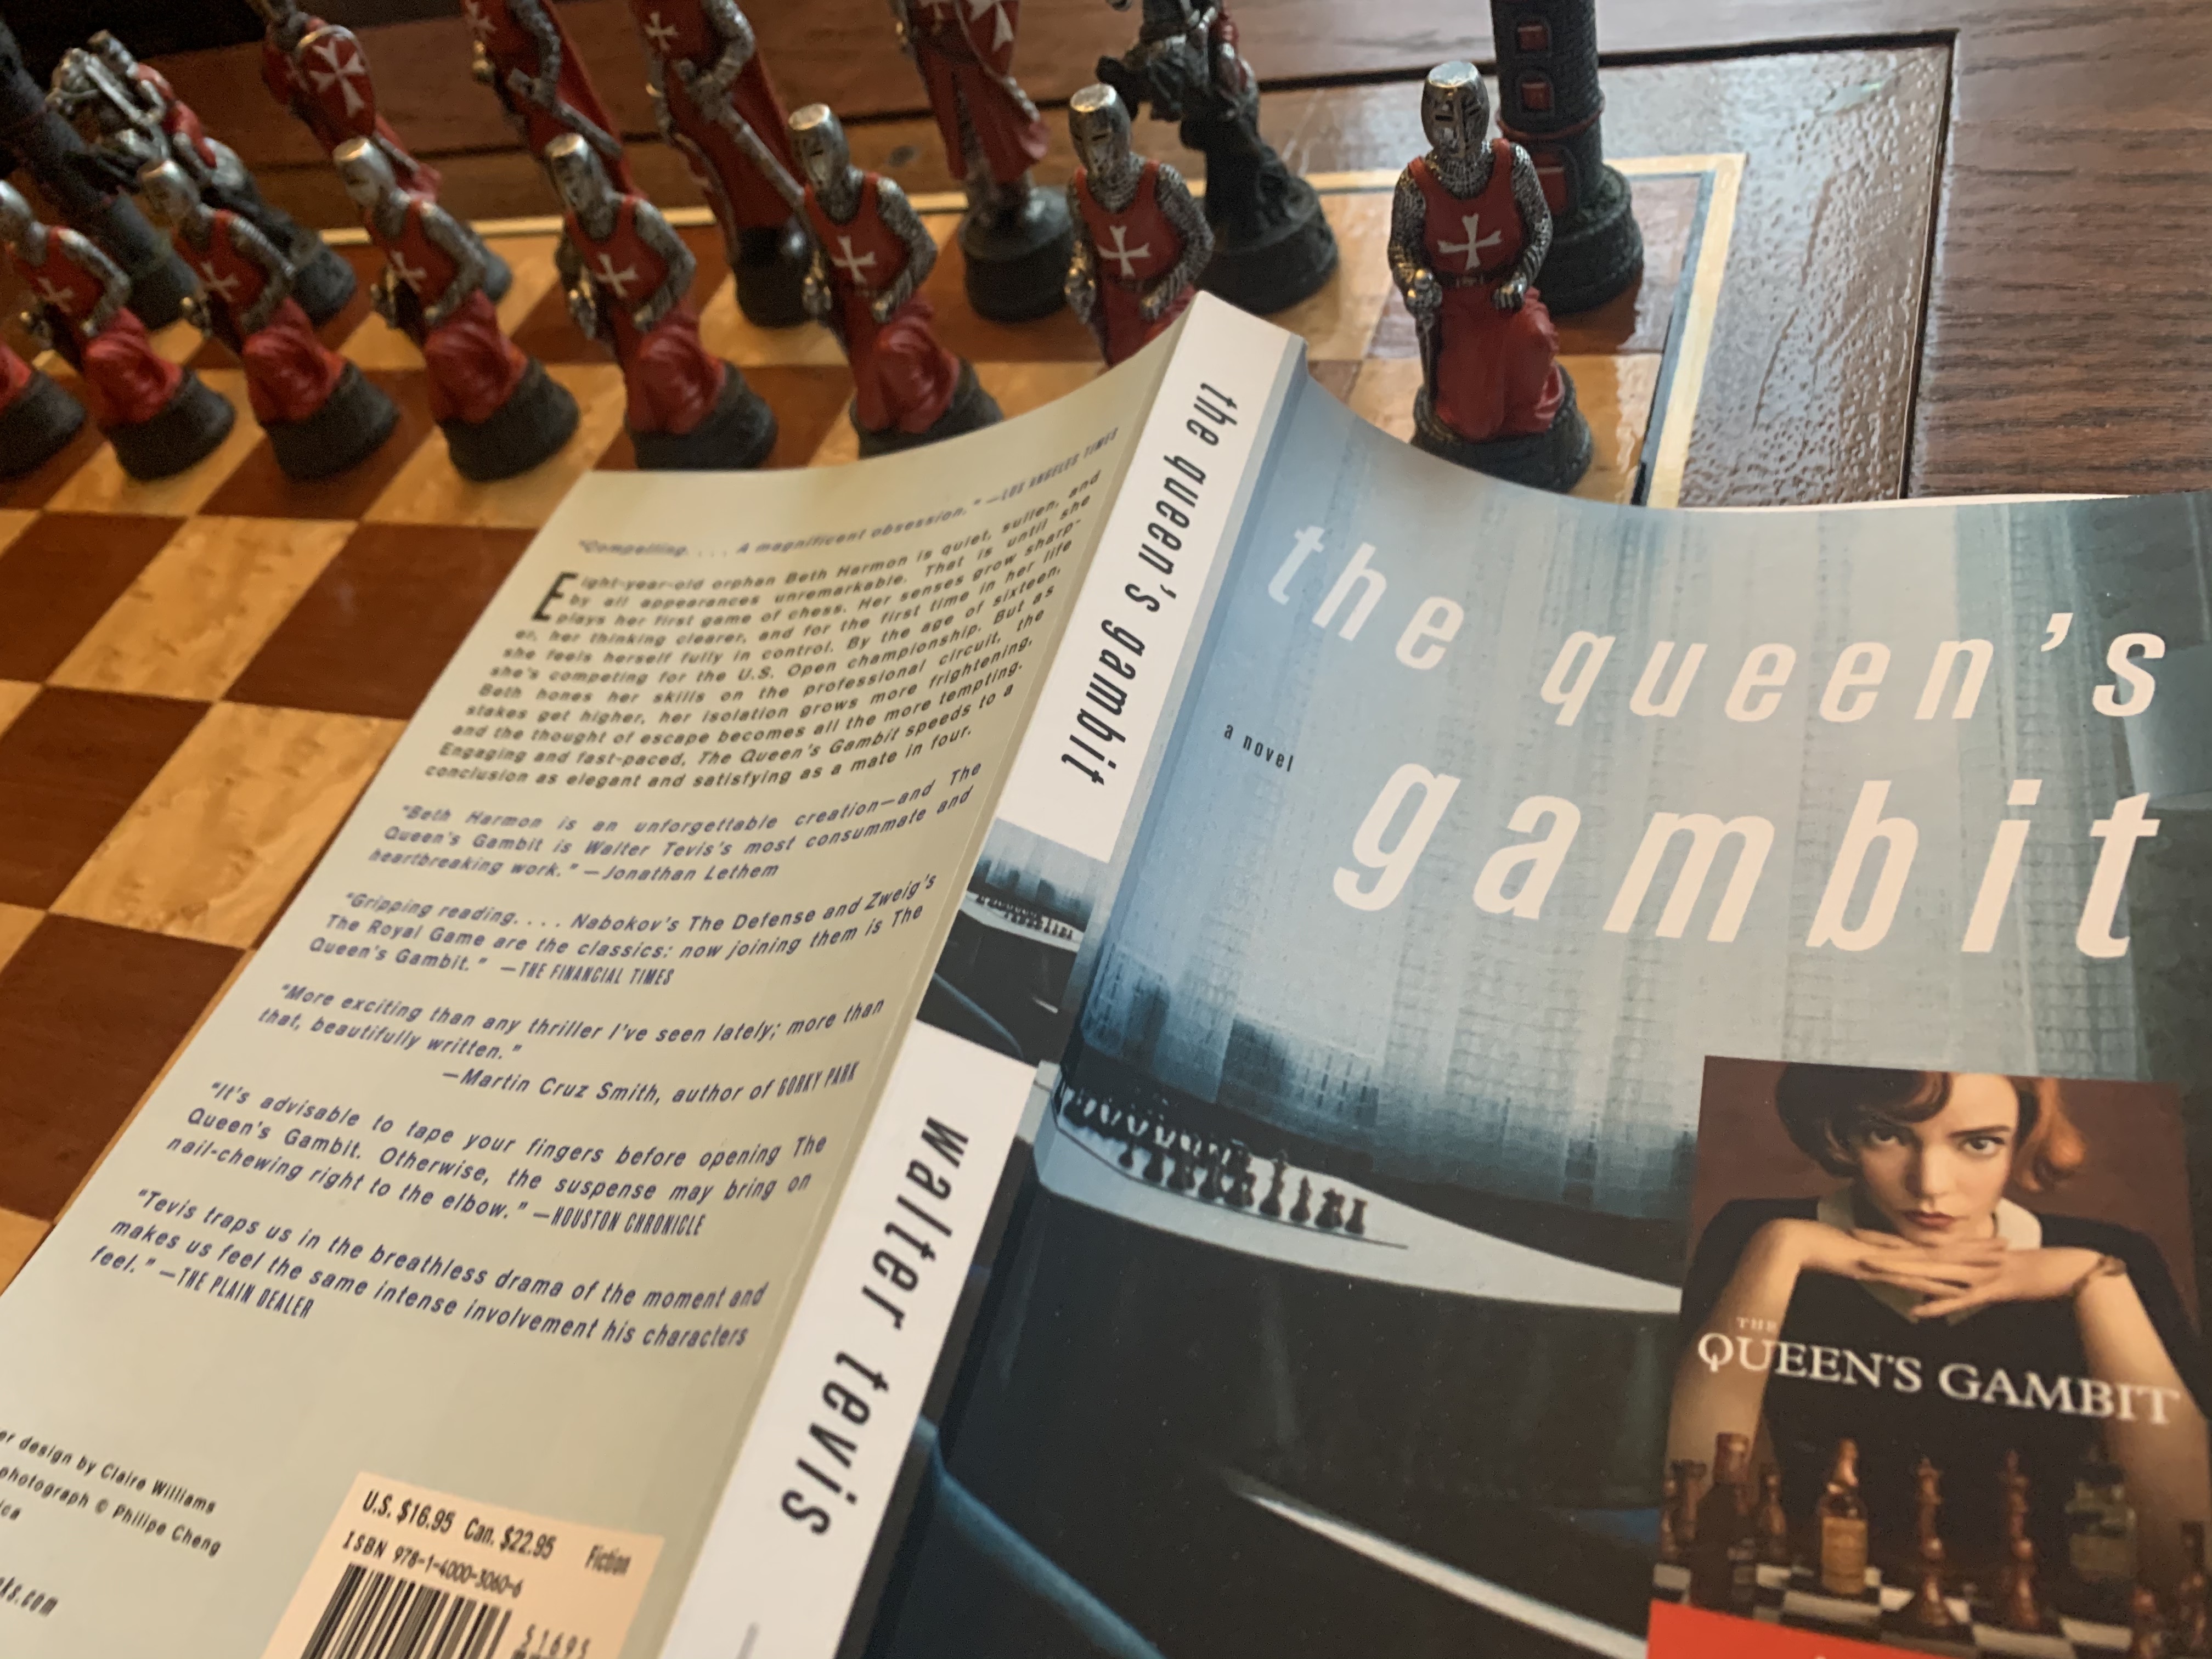 The Queen's Gambit: Epic Netflix chess series is addictive, Reviews